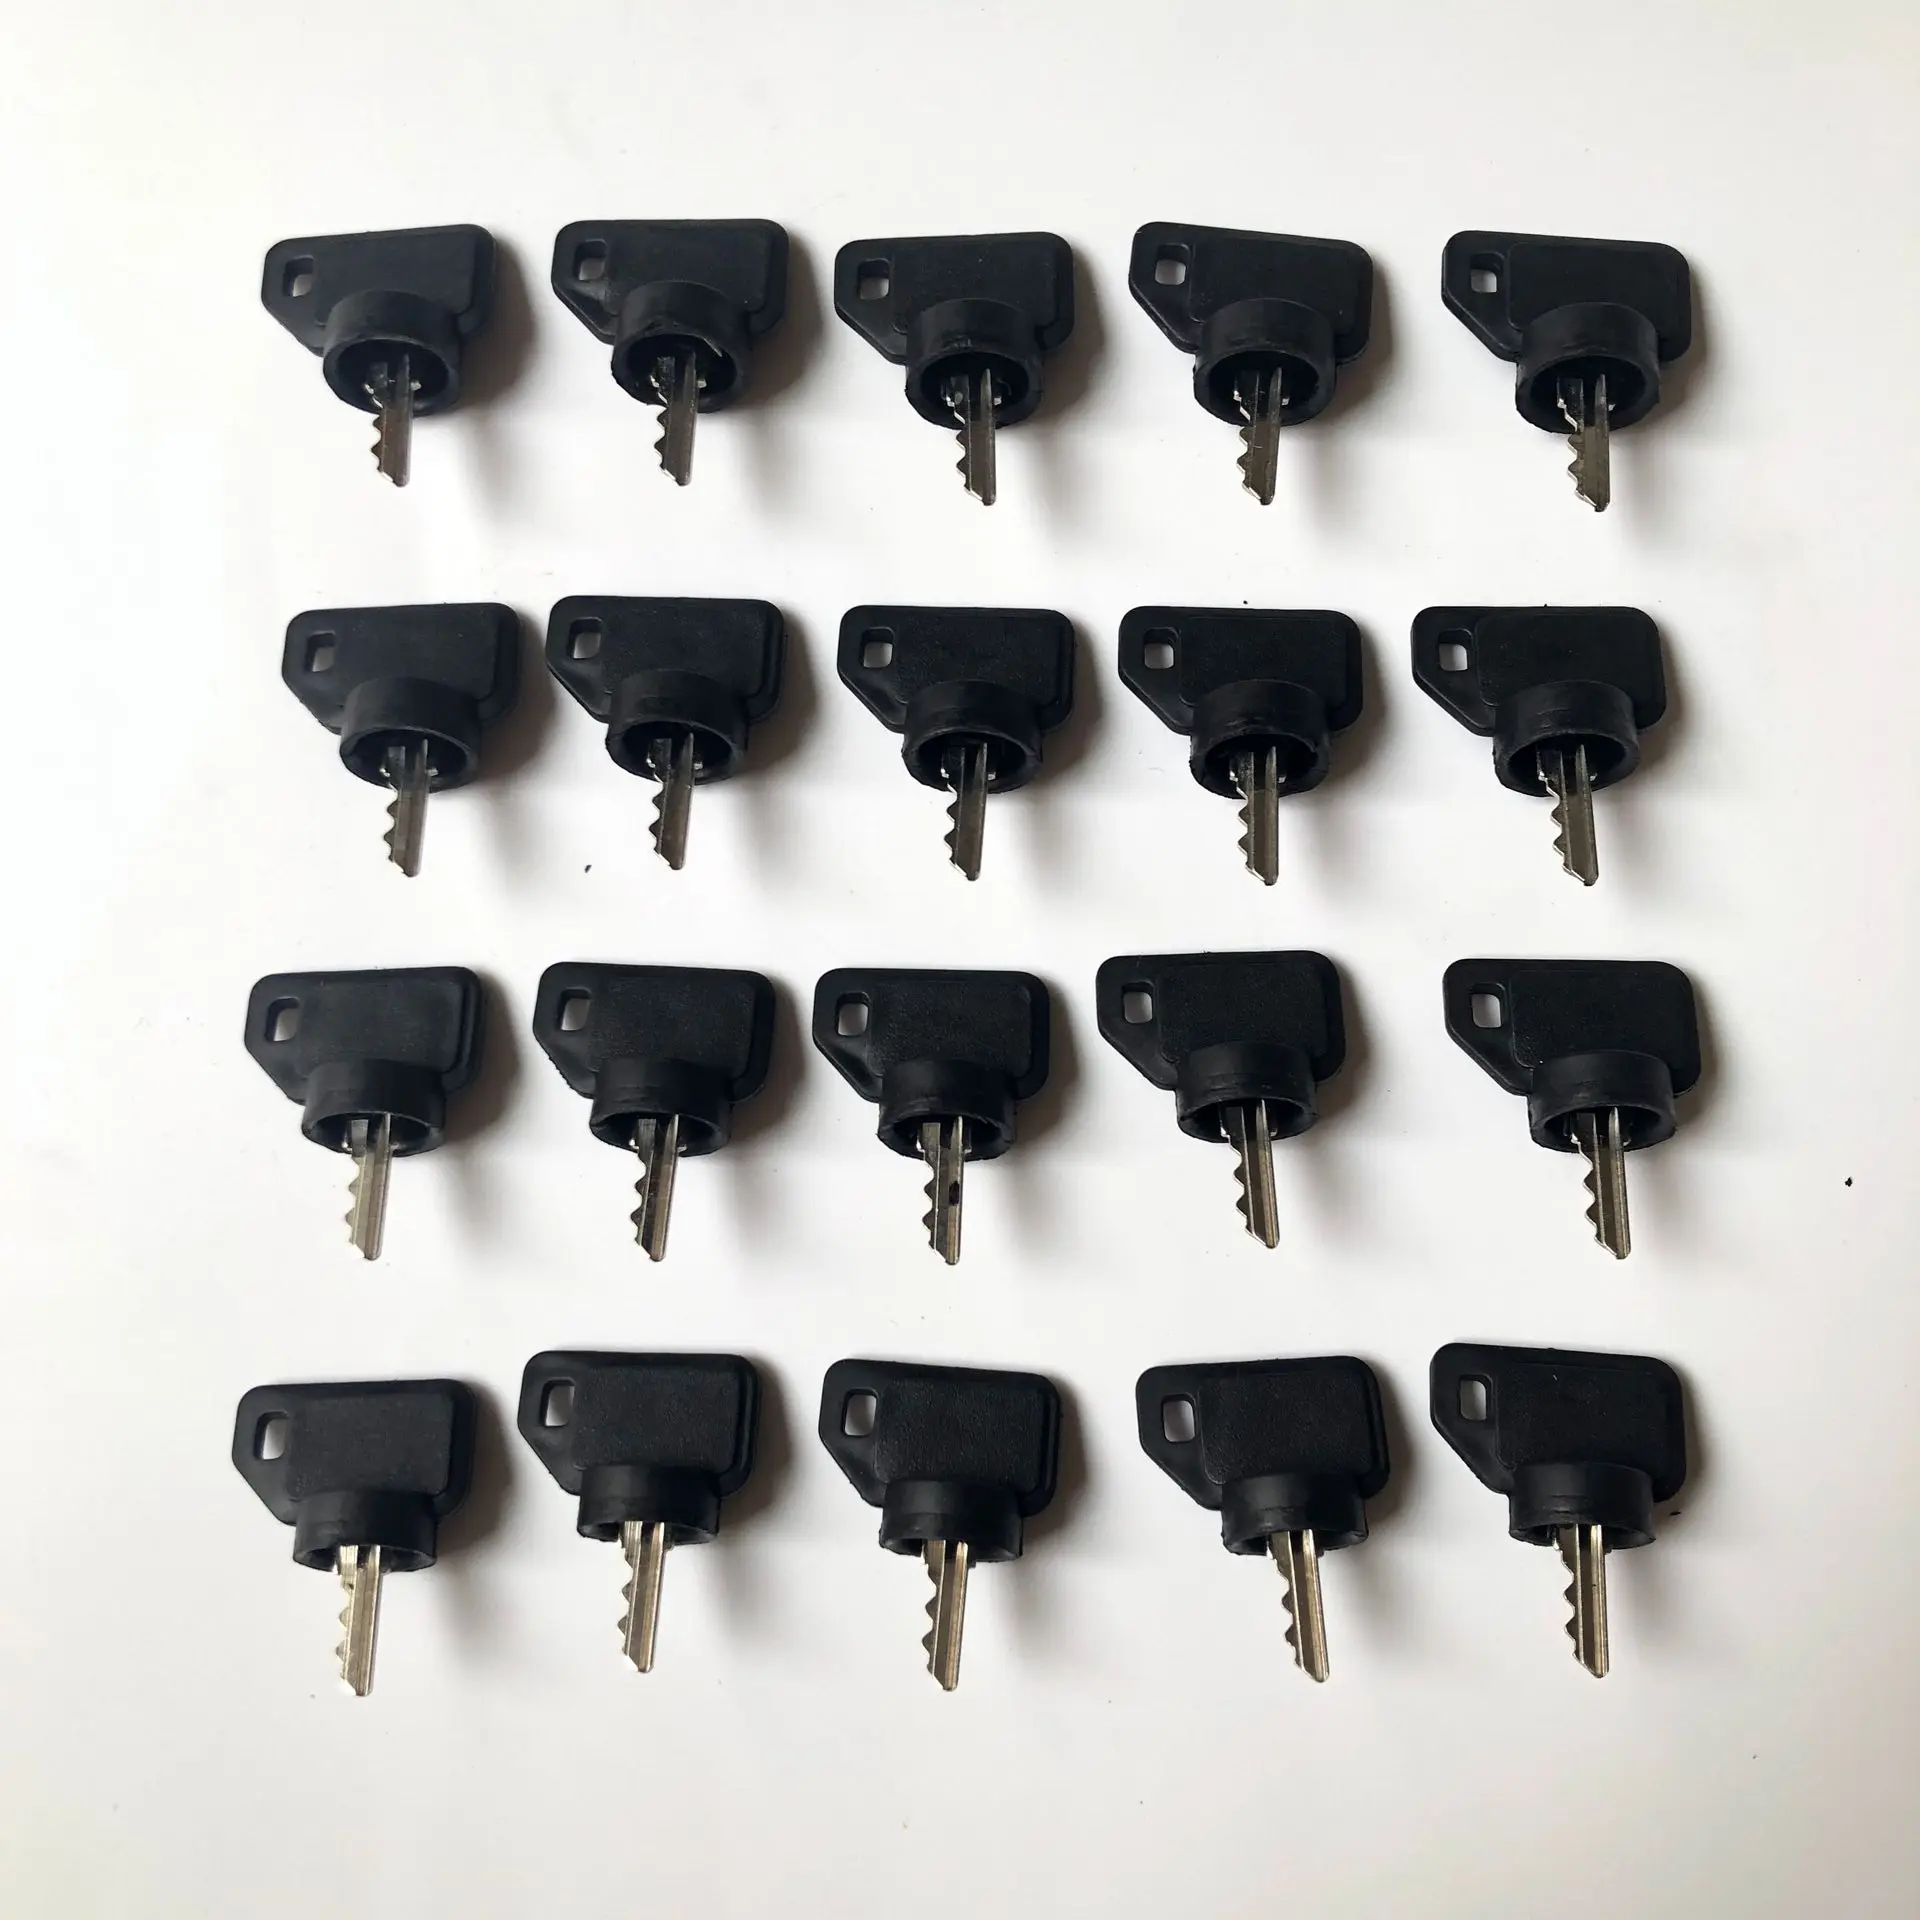 

20PCS 09287000 04331700 09089700 Key for HD Ariens Gravely